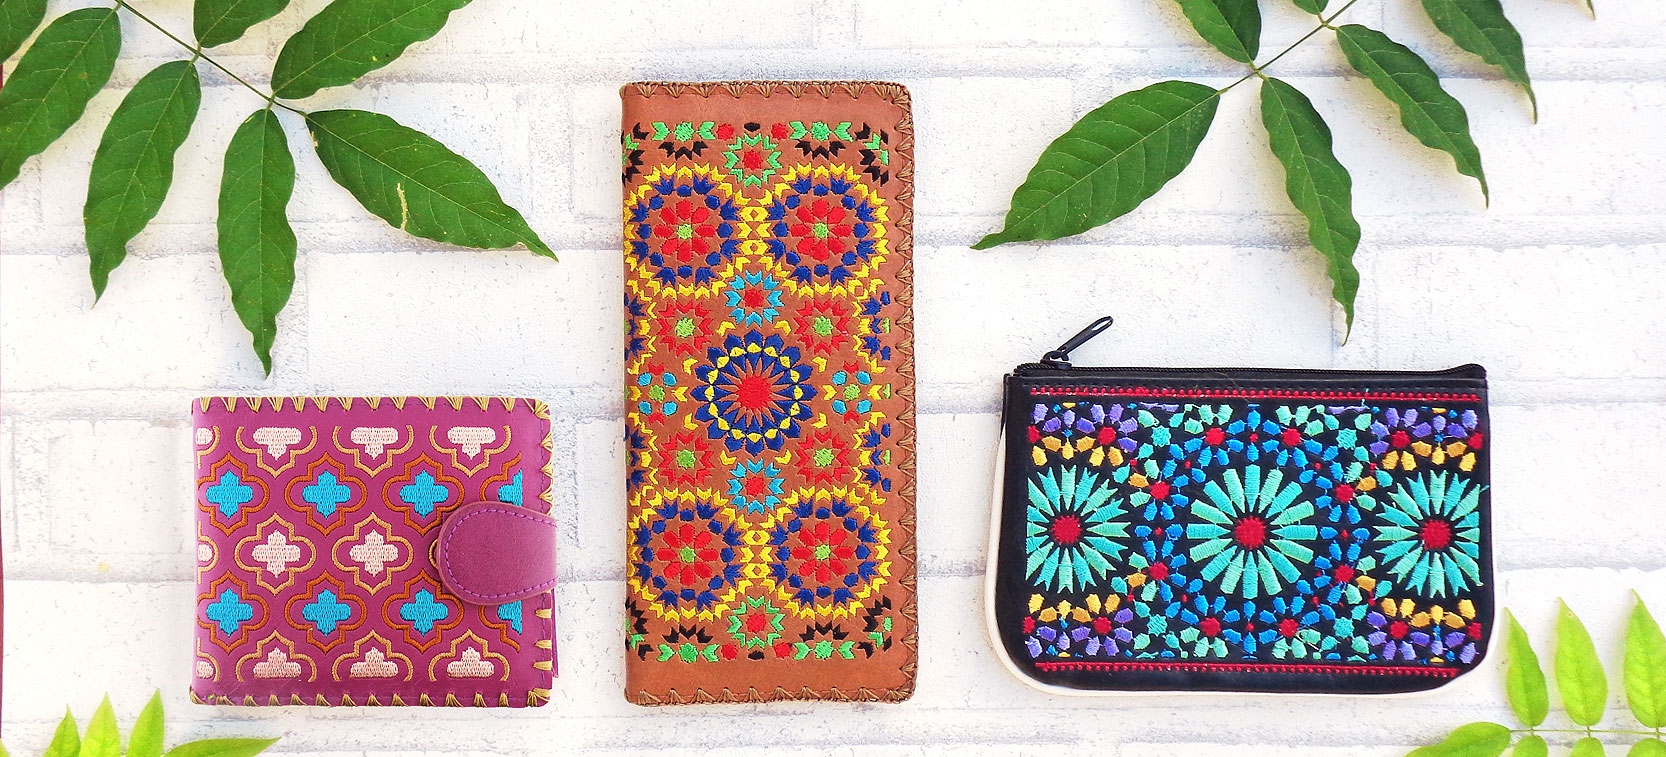 LAVISHY design and wholesale Morocco themed vegan accessories and gfits to gift shops, boutiques and book stores in Canada, USA and worldwide.